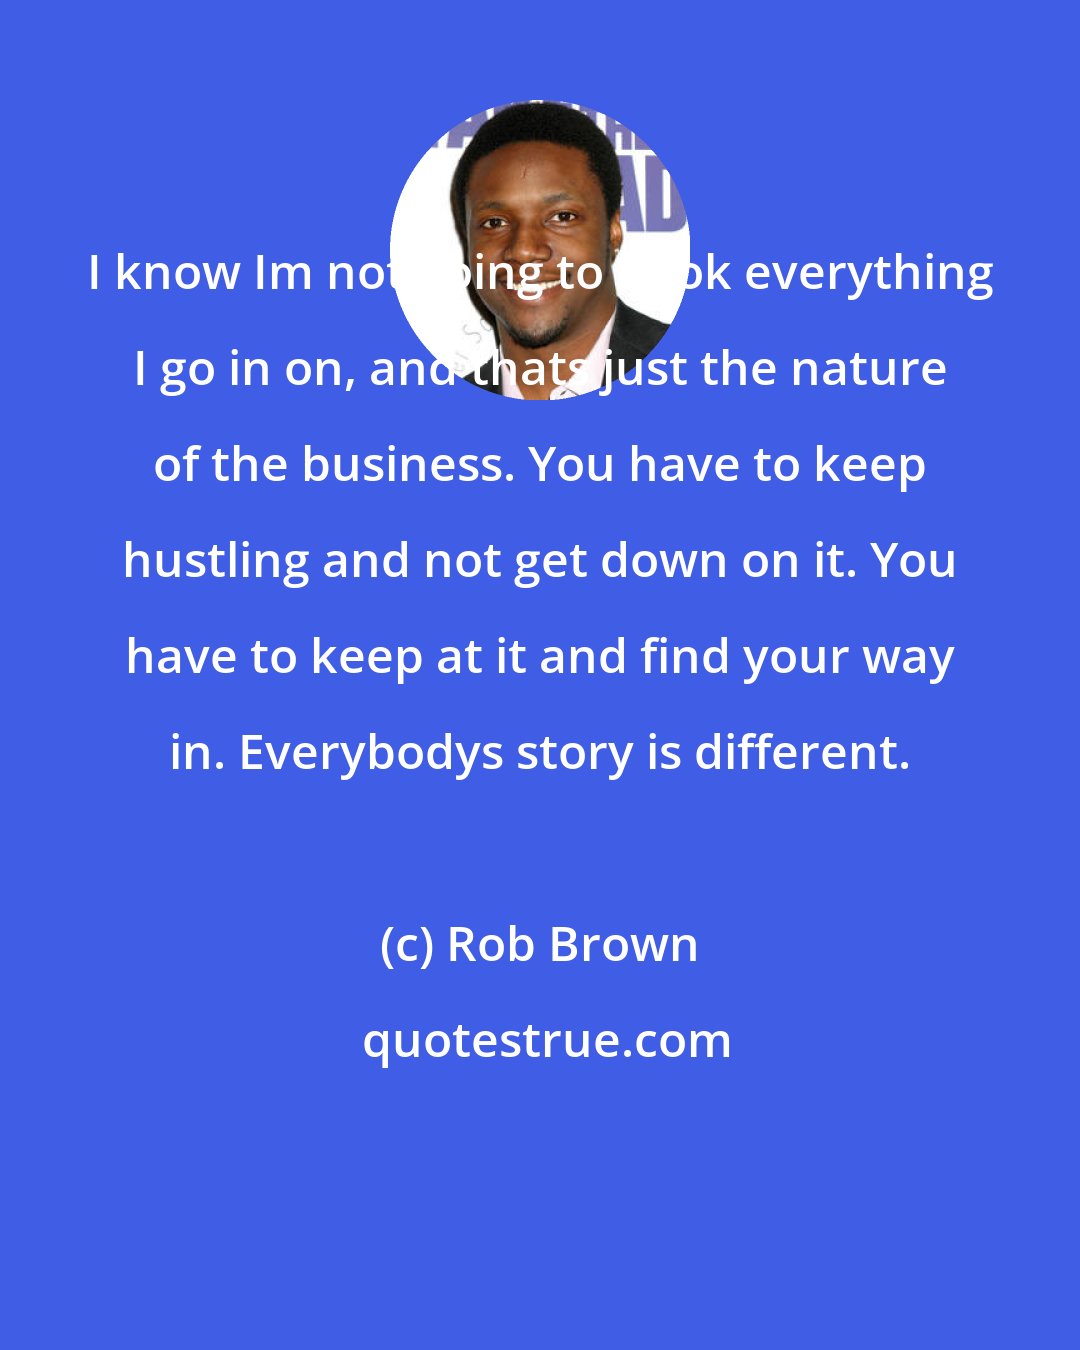 Rob Brown: I know Im not going to book everything I go in on, and thats just the nature of the business. You have to keep hustling and not get down on it. You have to keep at it and find your way in. Everybodys story is different.